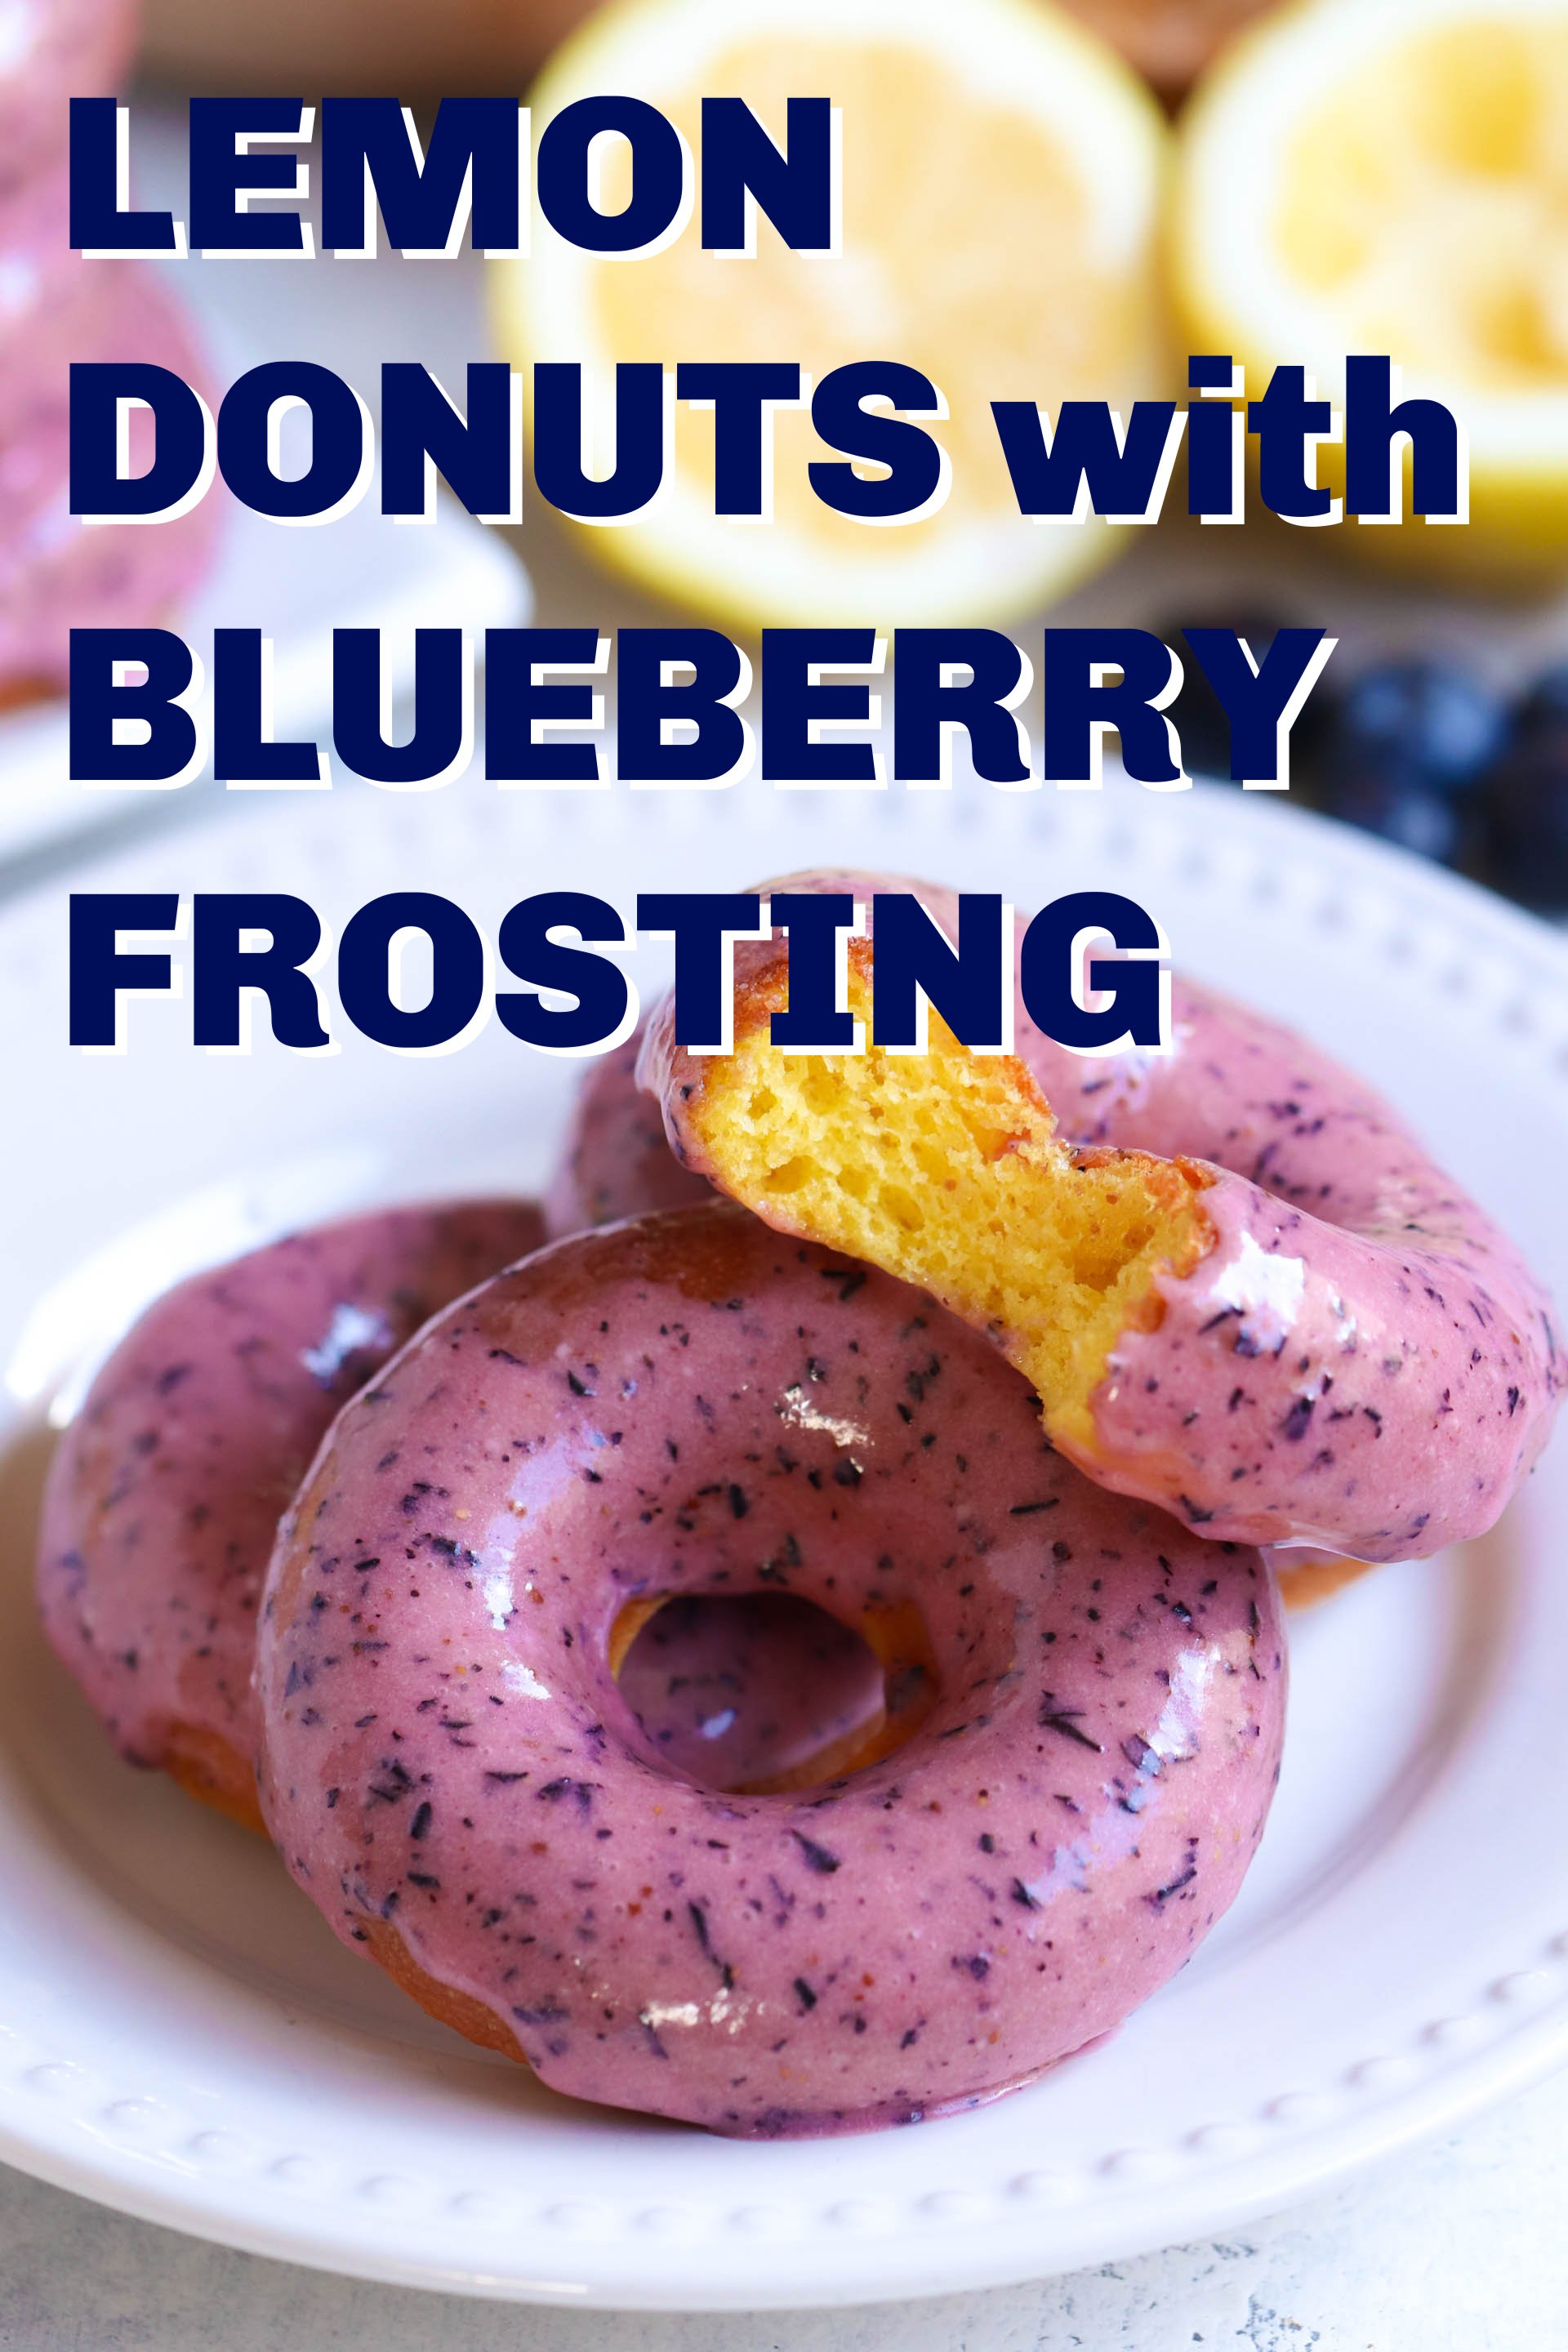 Lemon Donuts with Blueberry Frosting